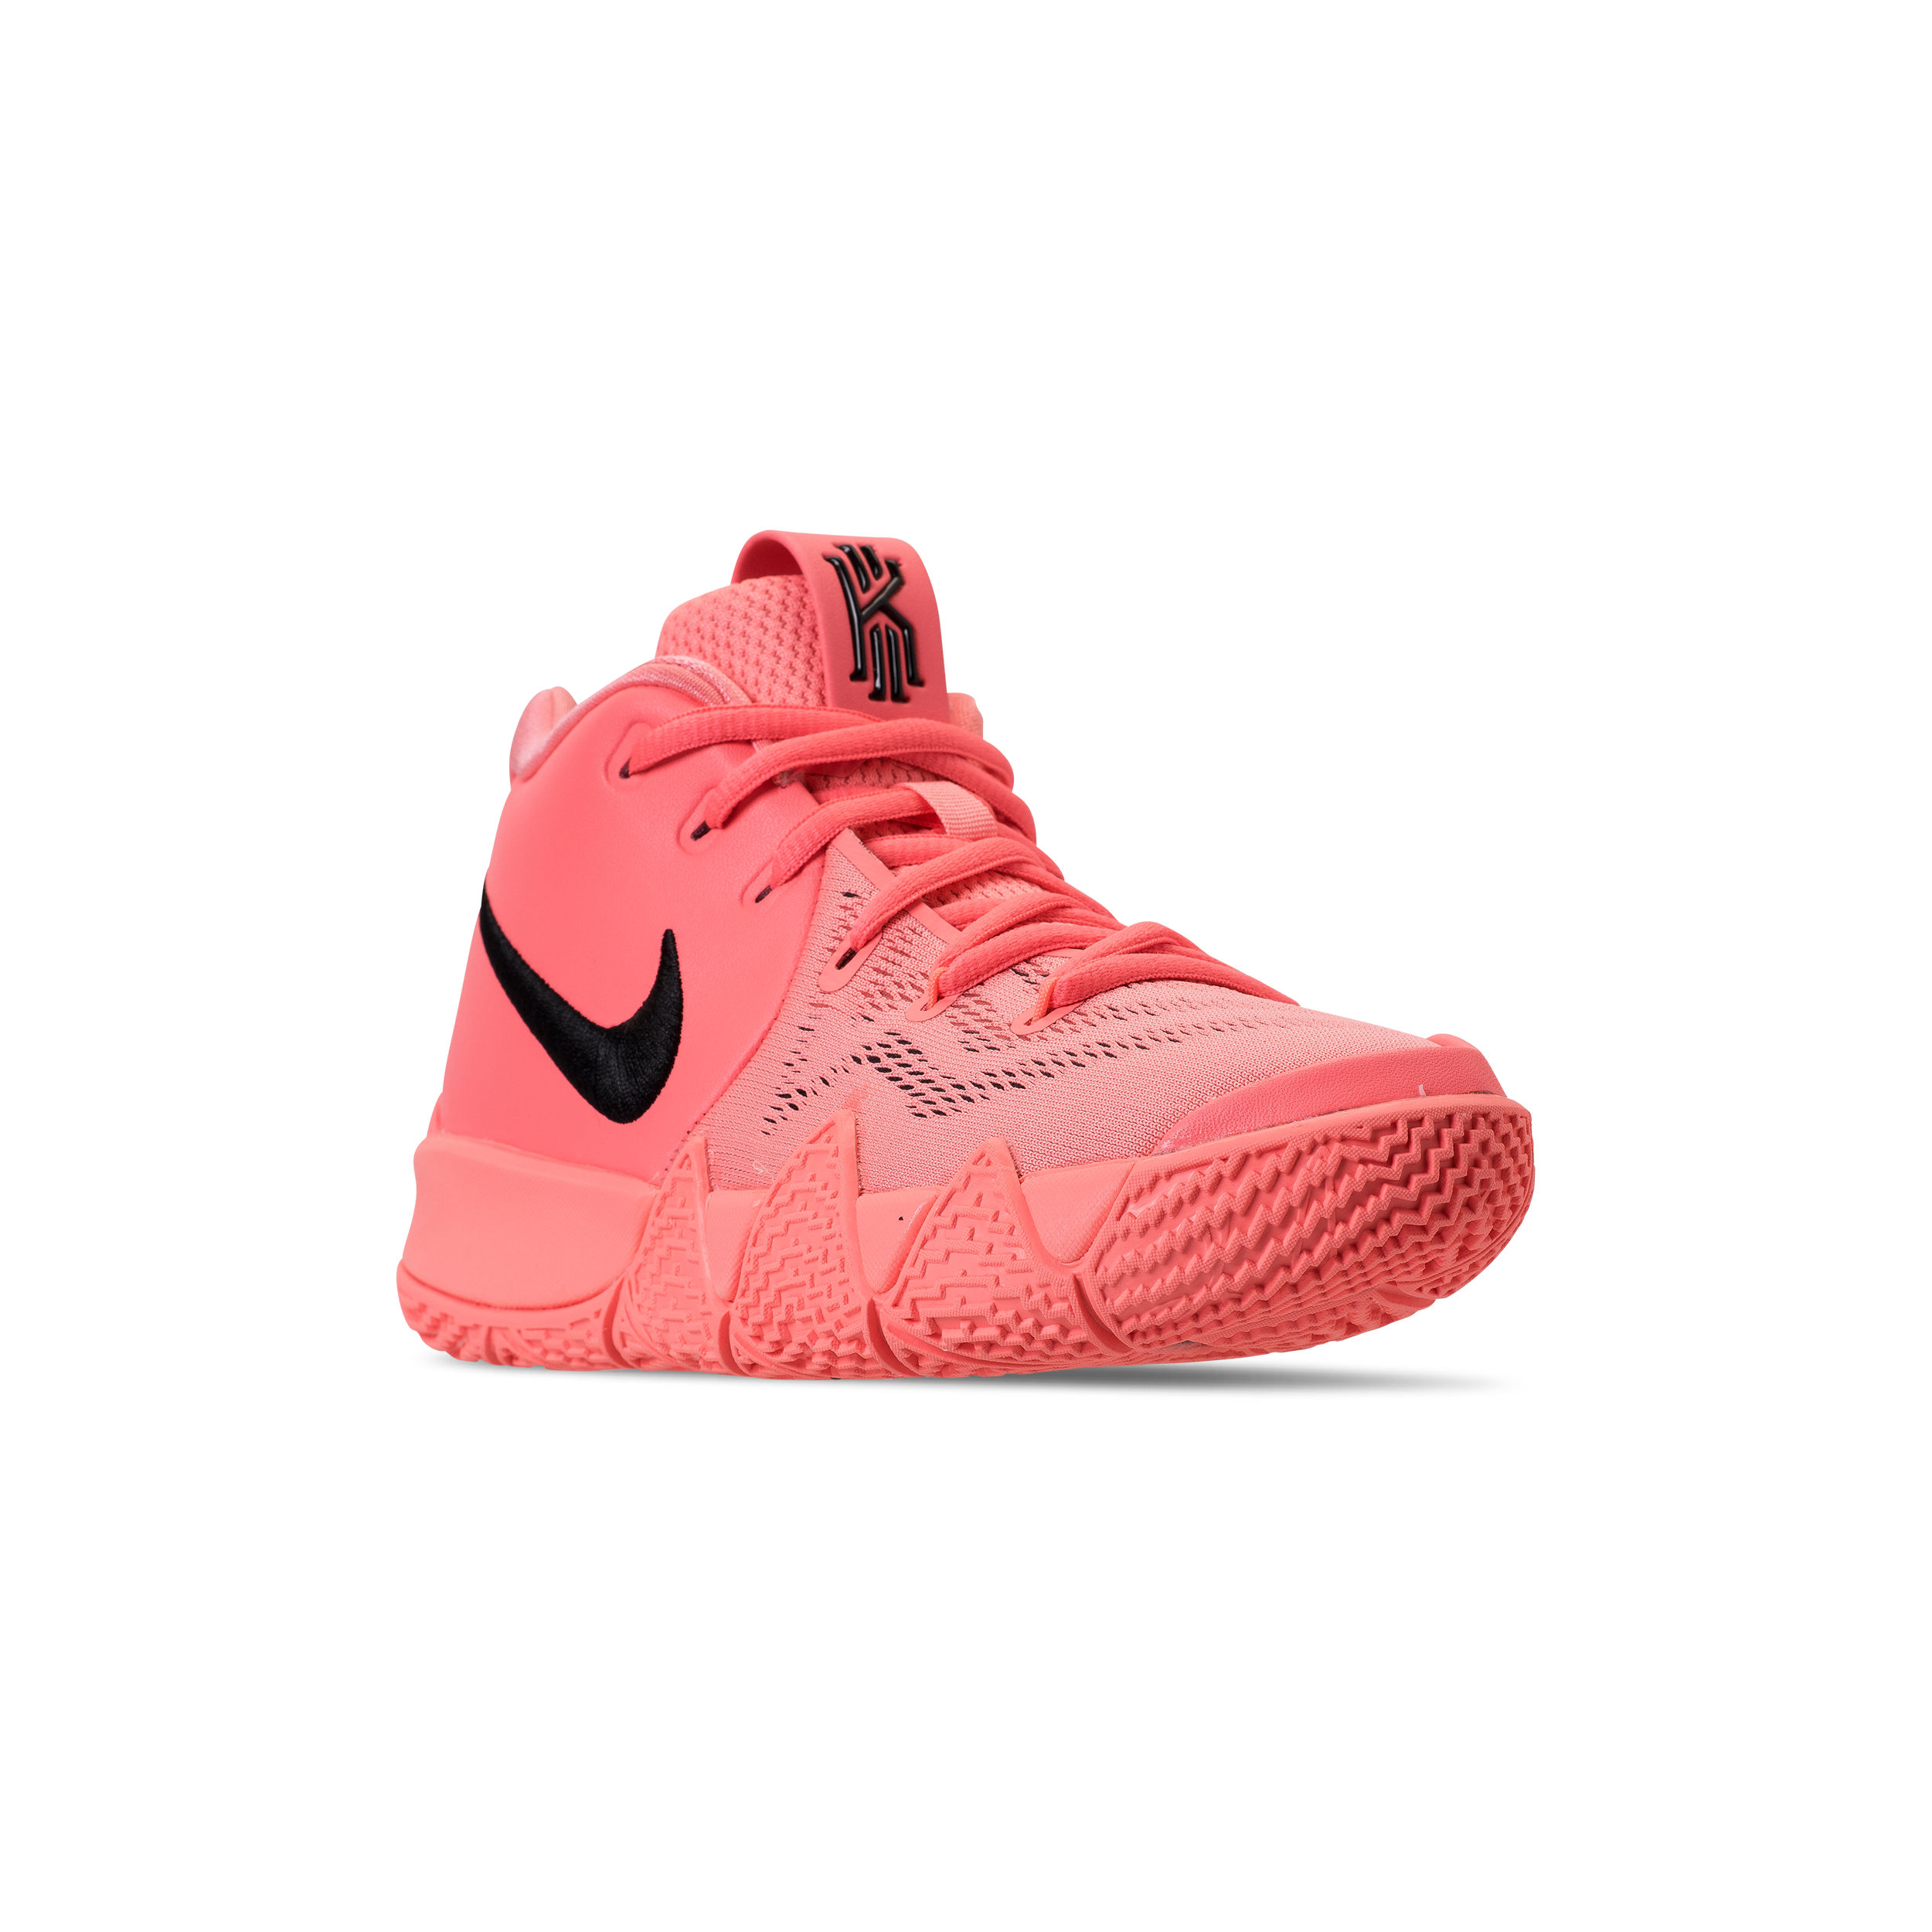 kyrie irving shoes 4 pink